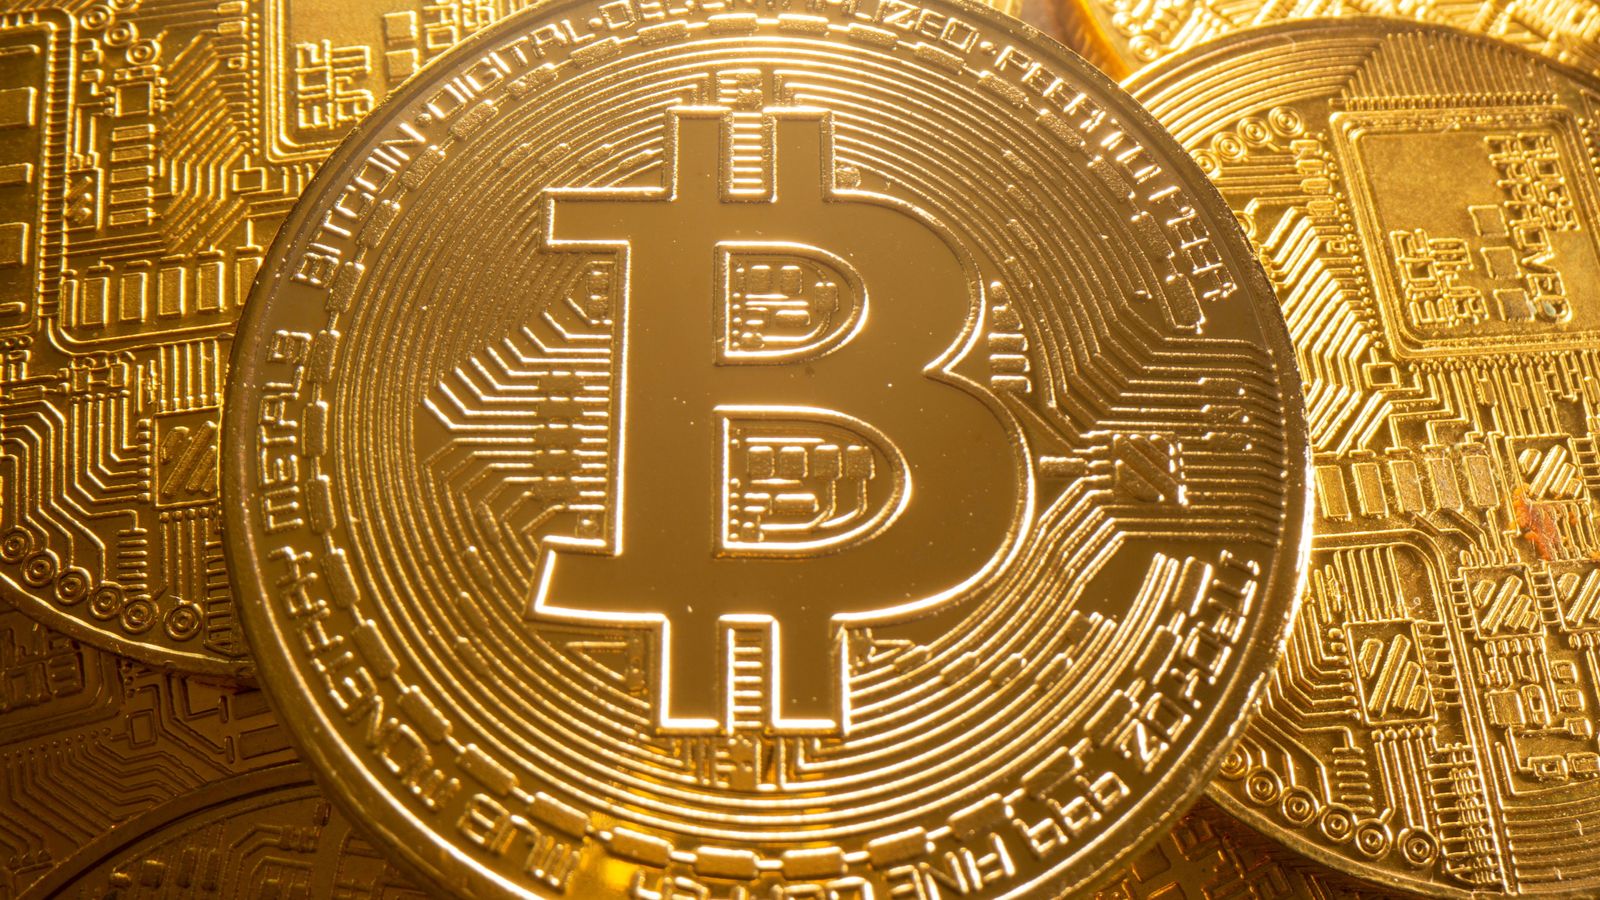 Bitcoin value hits new all-time high